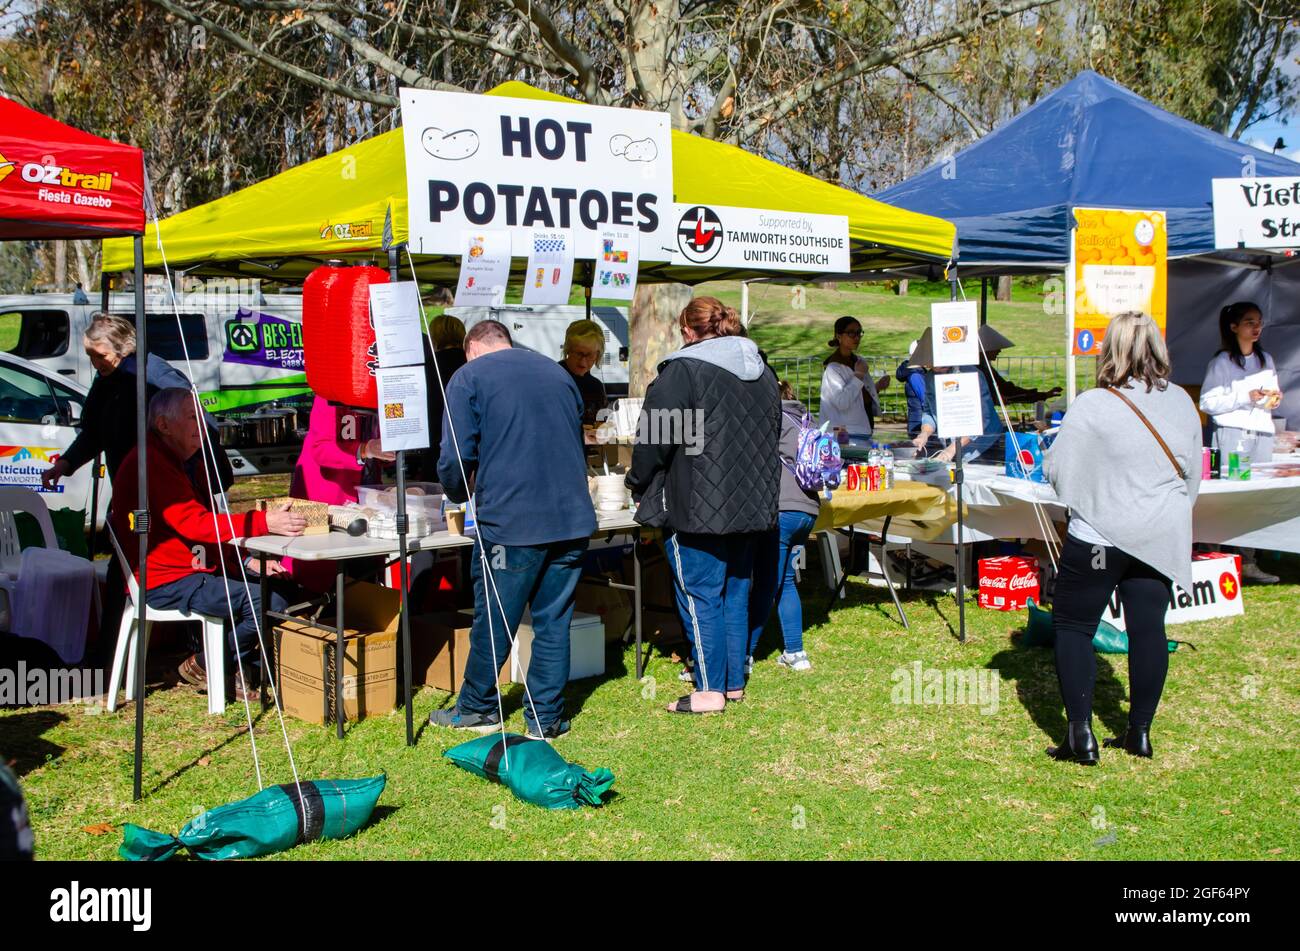 Hot potato hi-res stock photography and images image picture